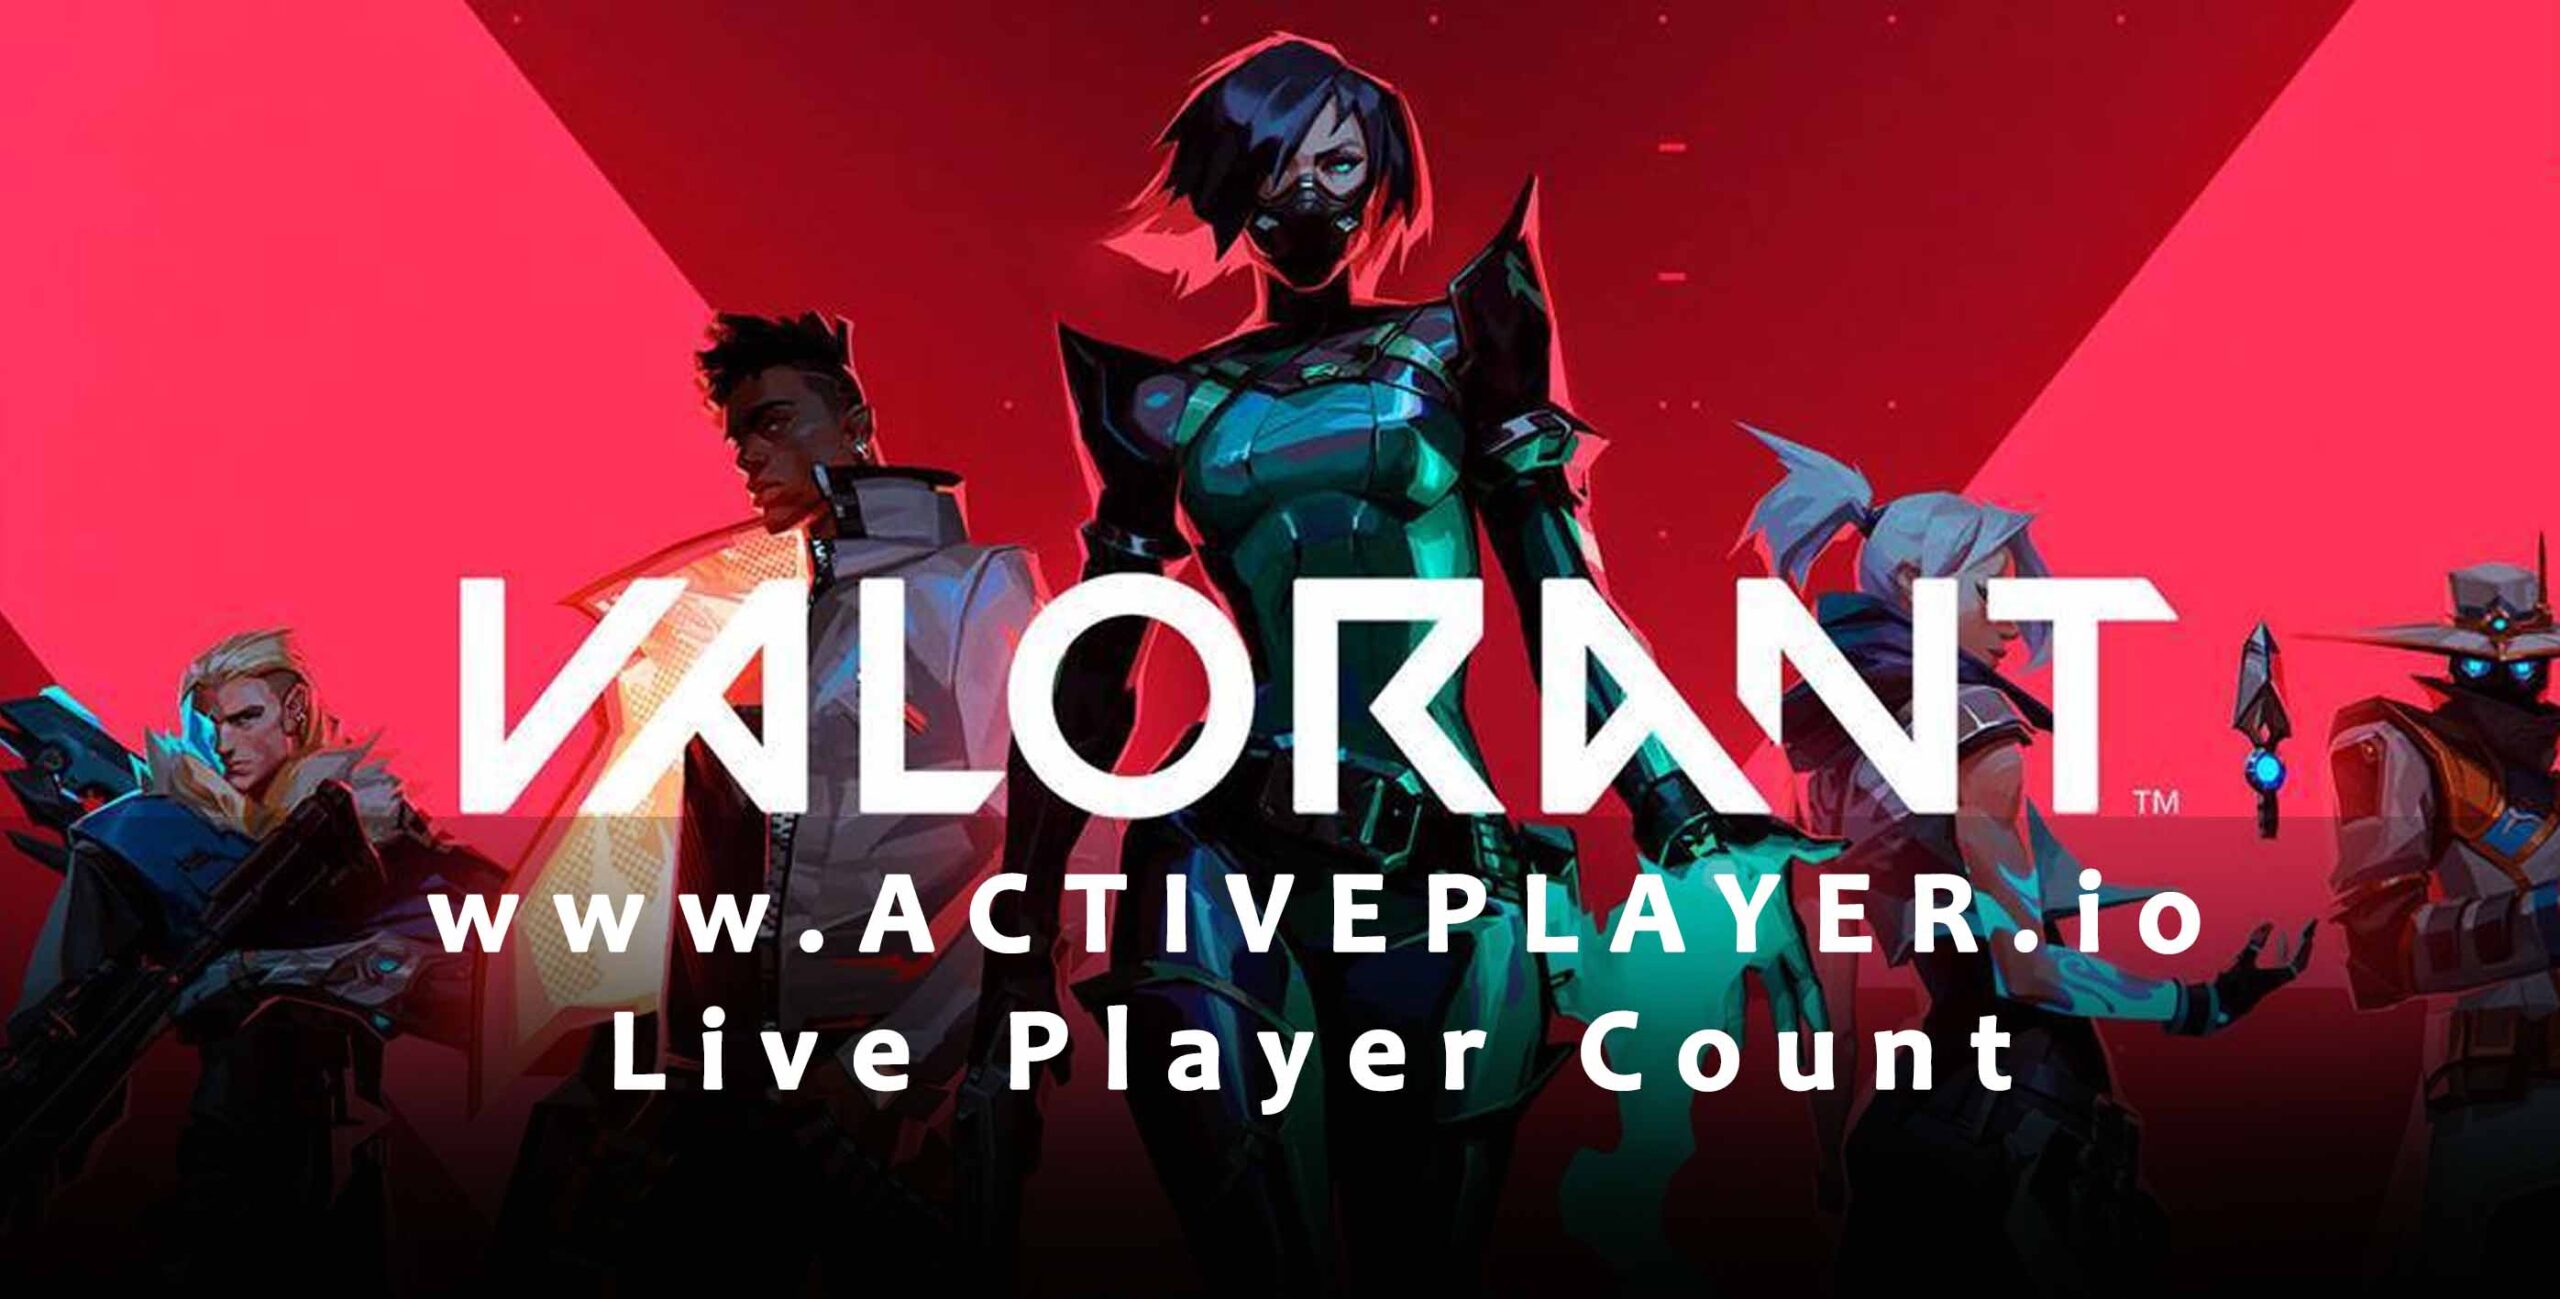 Is Valorant Dying? - VALORANT Viewership & Player Count in 2023